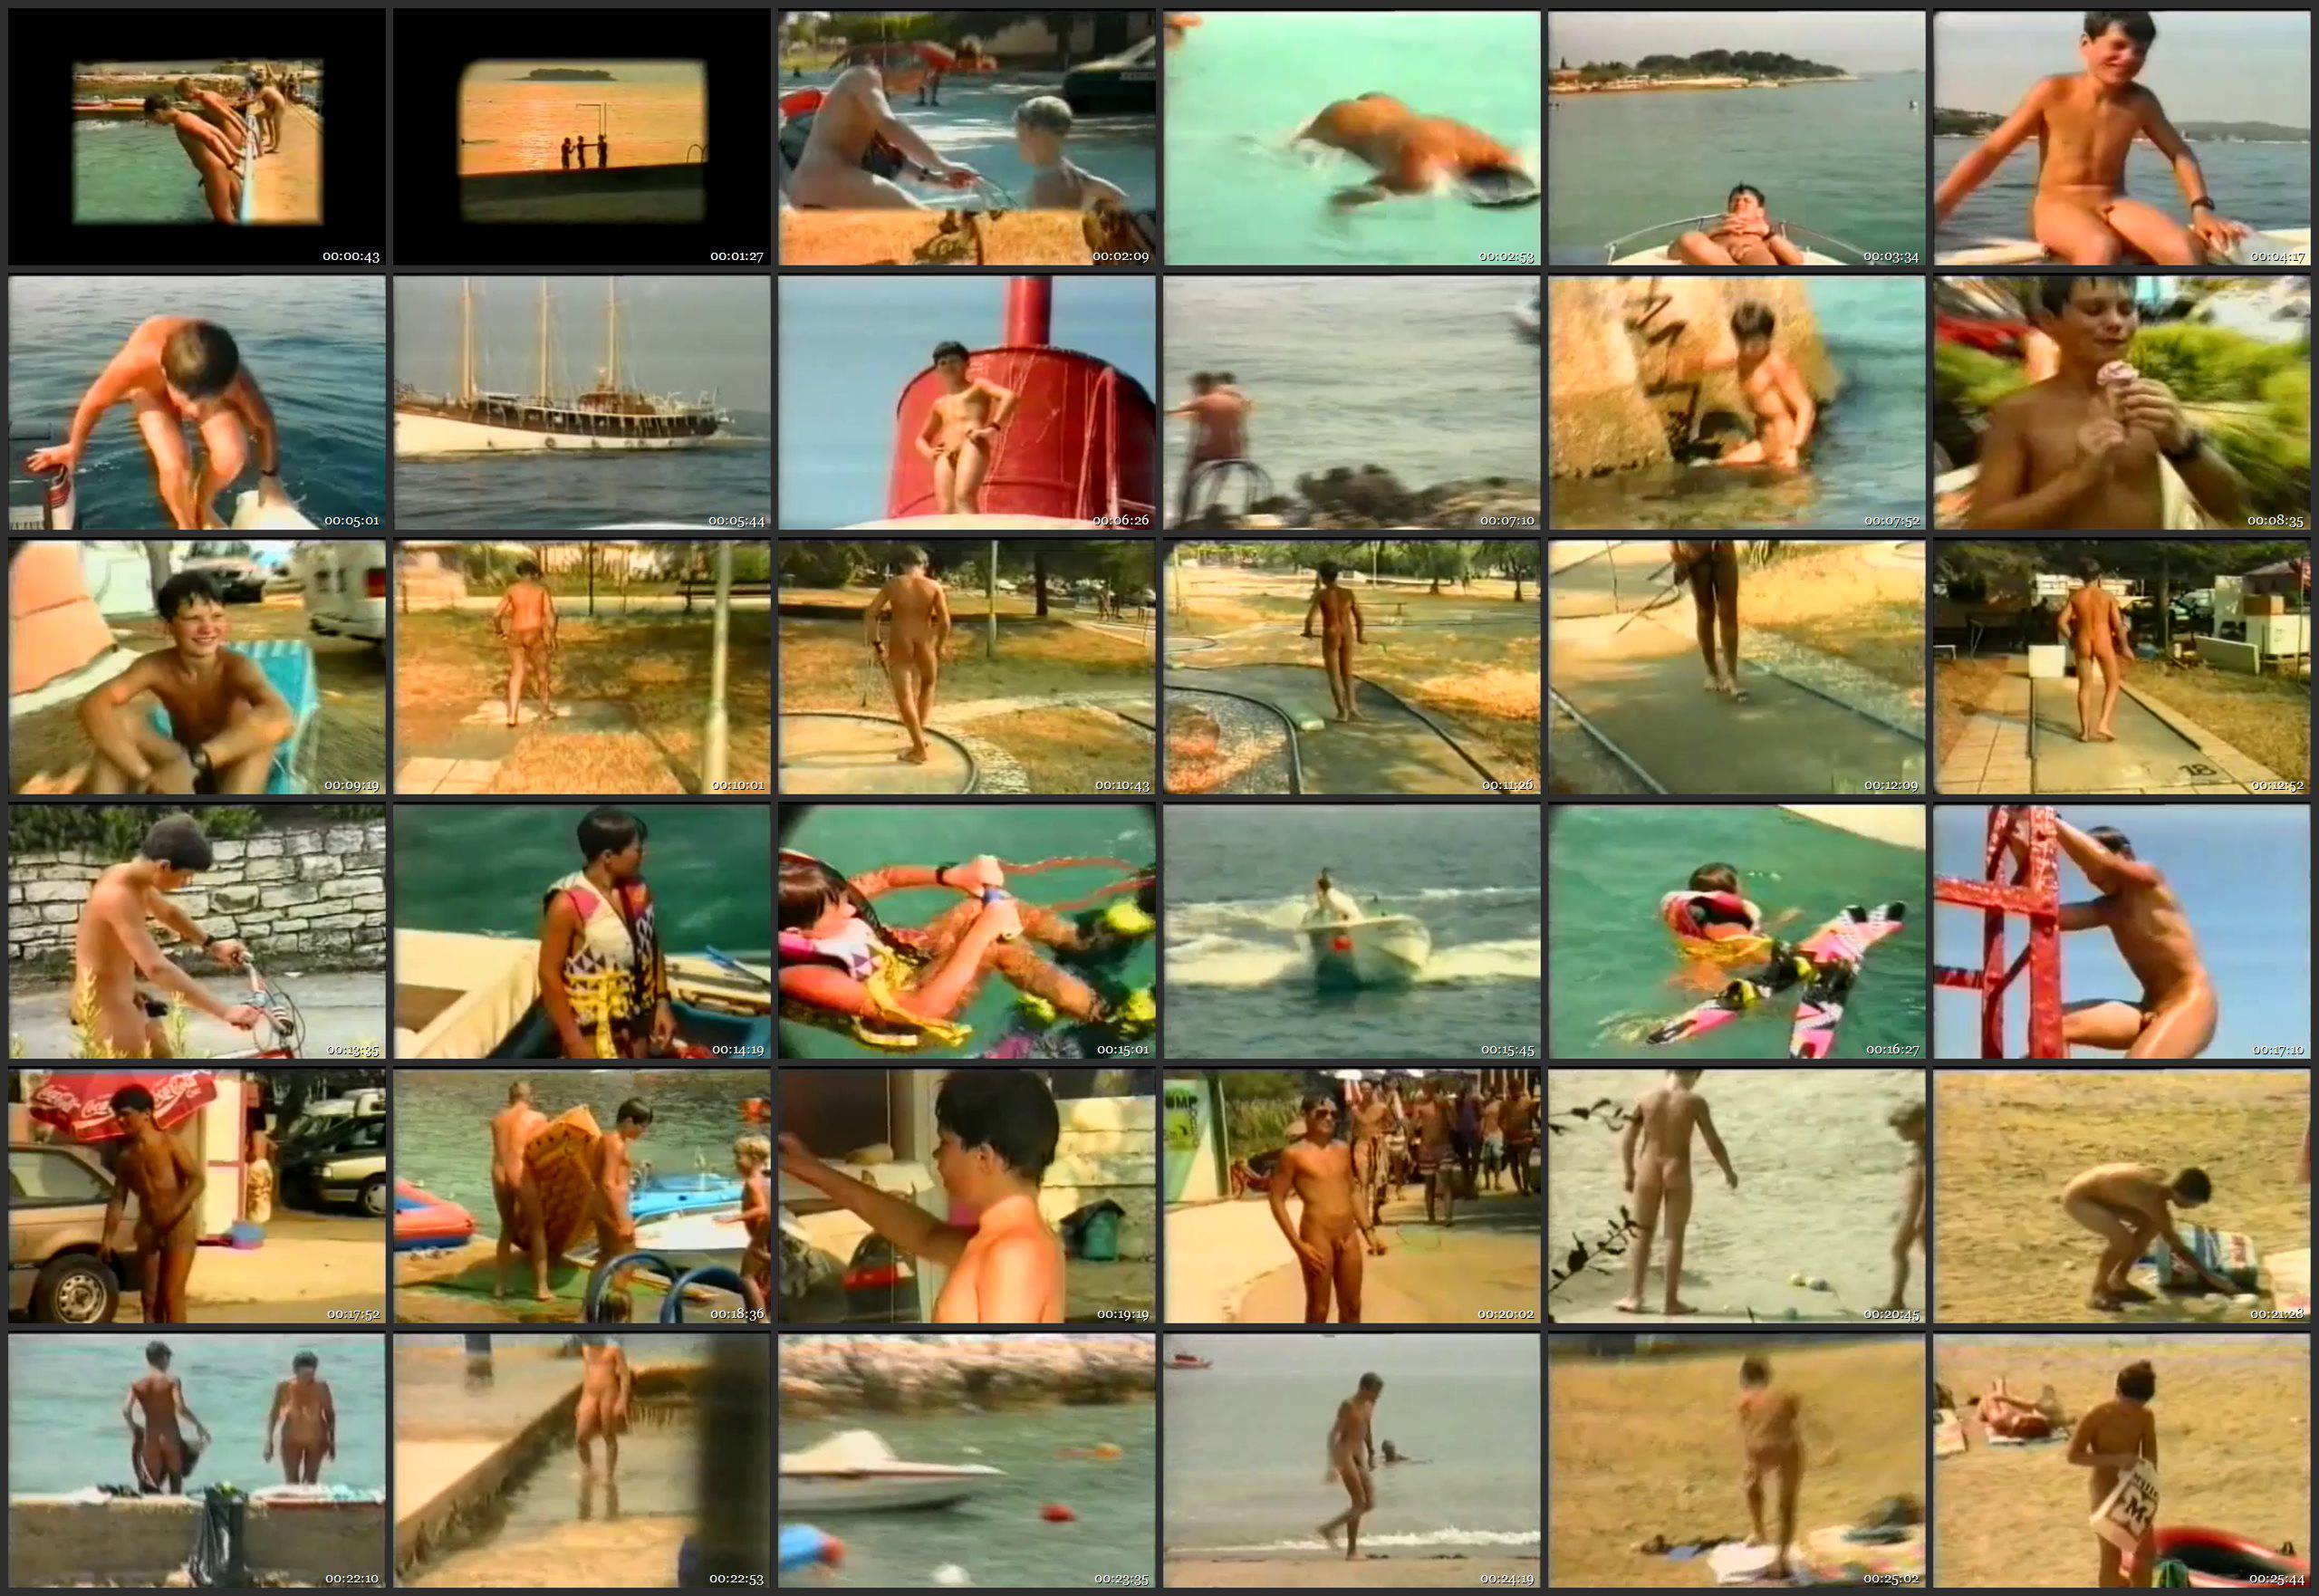 Nudist Videos-On The Land and In The Water - Nudist Boys Video - Thumbnails